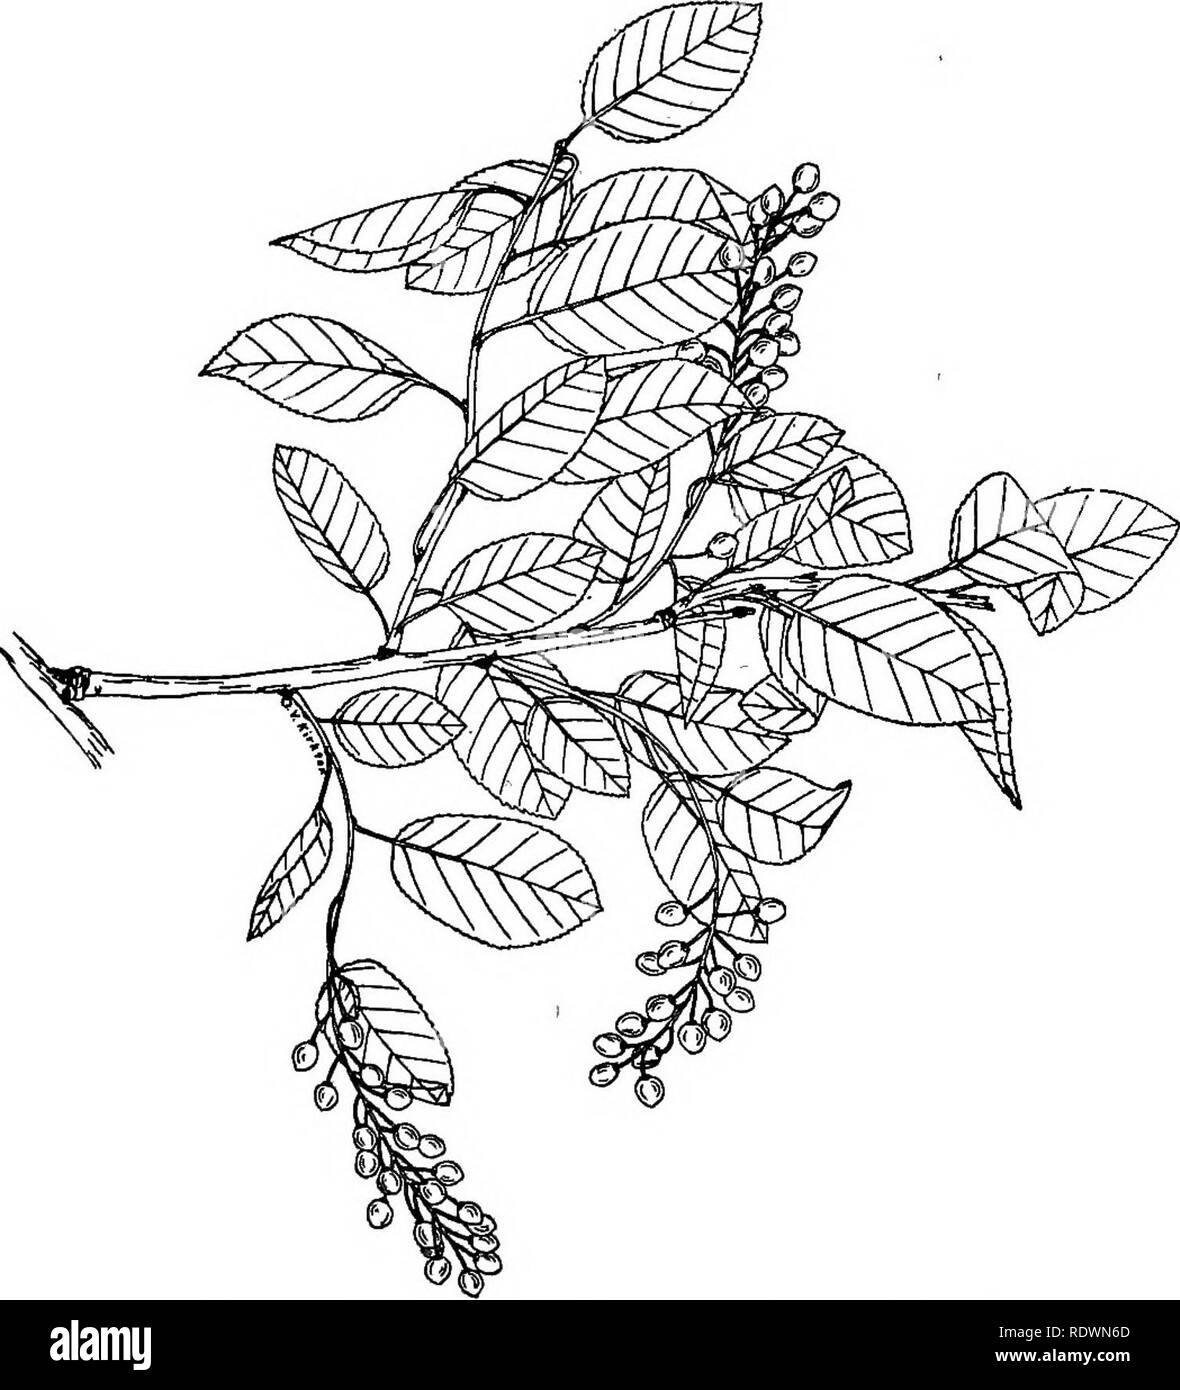 . Wild flowers and trees of Colorado. Botany. 72 WILD FLOWERS AND TREES OF COLORADO. Fig. 64.—Choke Cherky {Prunus mdanocarpa). X J Genus 16. ROBINIA, Locust The native Colorado locust is closely related to the common black locust or yellow locust now so often planted for posts and railway ties. I a. Small tree or shrub with pinnately compound leaves and pink, pea-like flowers, pro- ducing many-seeded pods. Along streams in southern part of state. Robinia neo-mexicana A. Gray. &quot;Pink Locust&quot; Genus 17. ACER, Maples and Box-Elder ia. Leaves compound, of 3, 5 or 7 leaflets. Acer interior Stock Photo